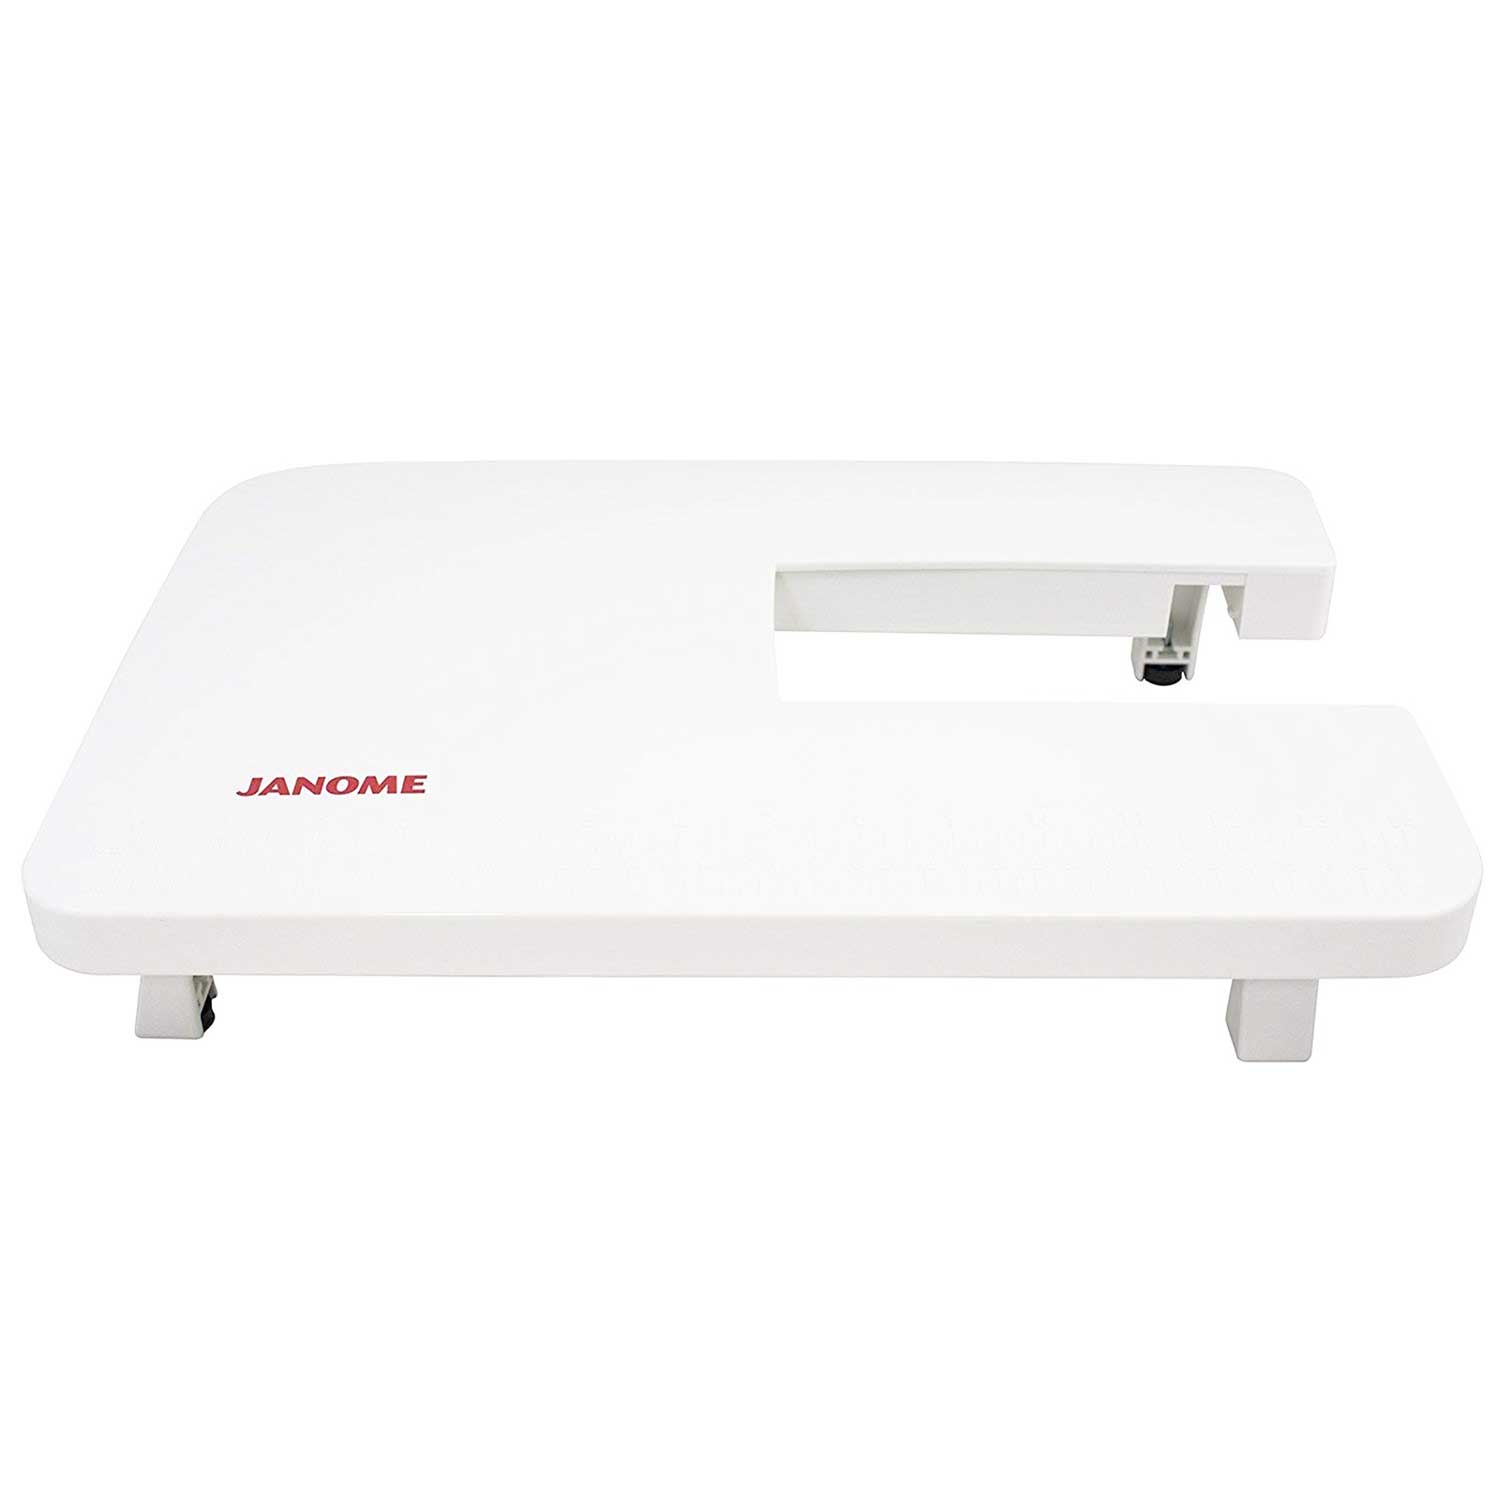 Janome-DC6100-table-1